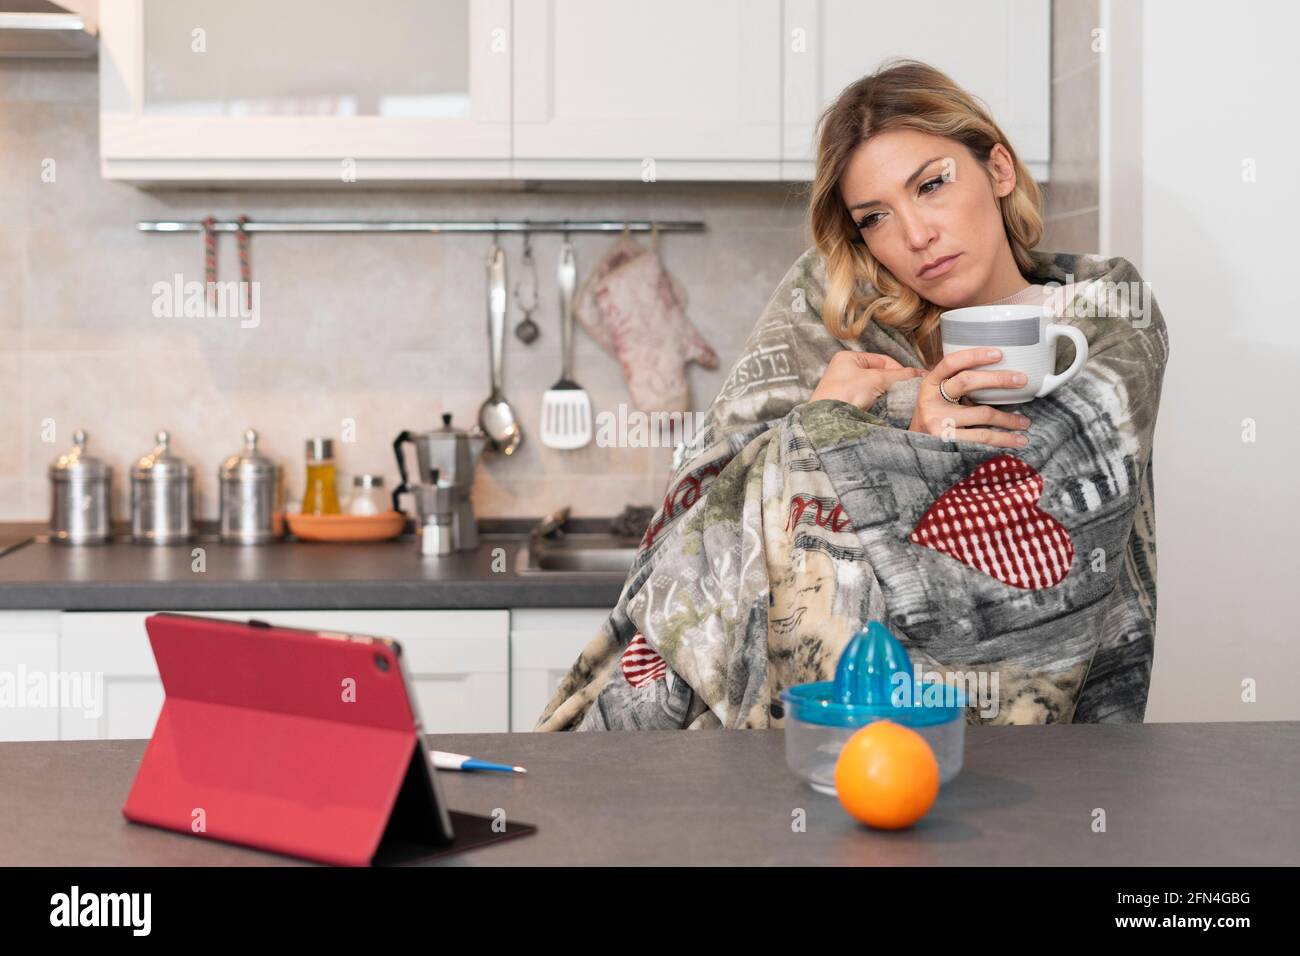 Sick blonde woman watches a tv series on the tablet. Girl fights the cold virus with a blanket over her shoulders and drinking hot herbal tea. Stock Photo